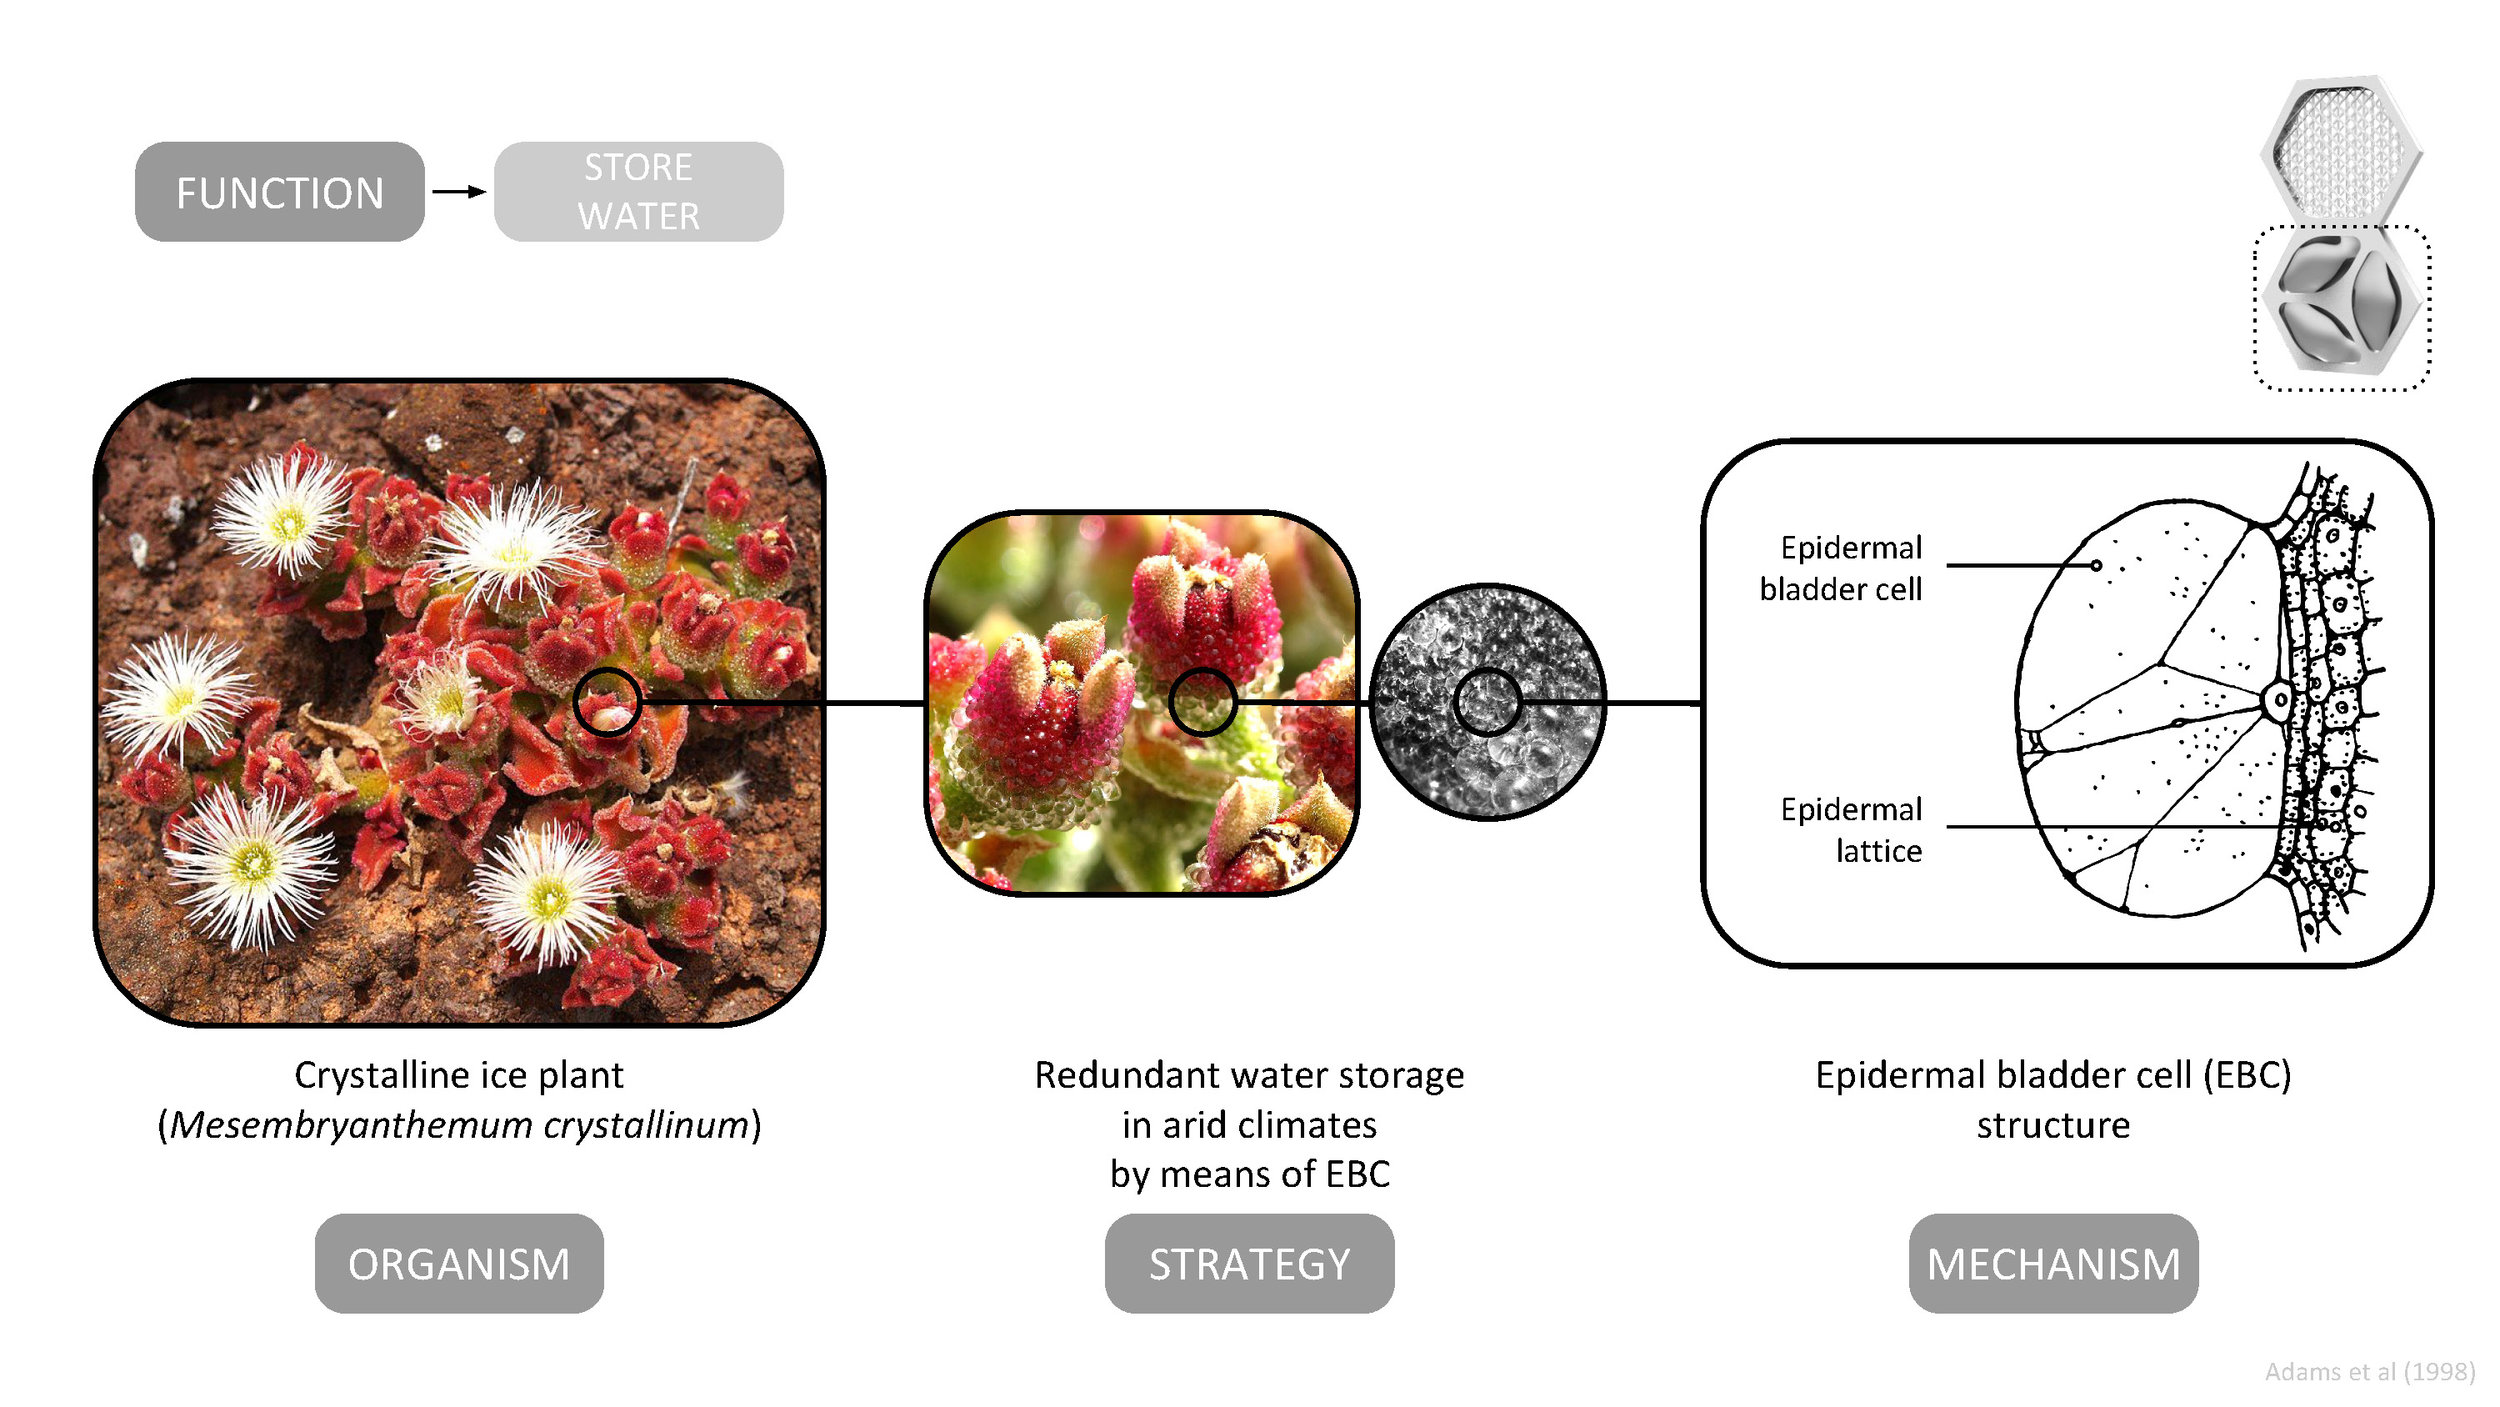  The AquaWeb's decentralized storage strategy is inspired by the epidermal bladder cells of the crystalline ice plant ( Mesembryanthemum crystallinum ) .    The bladder cell network is an excellent example of distributed water storage that builds res